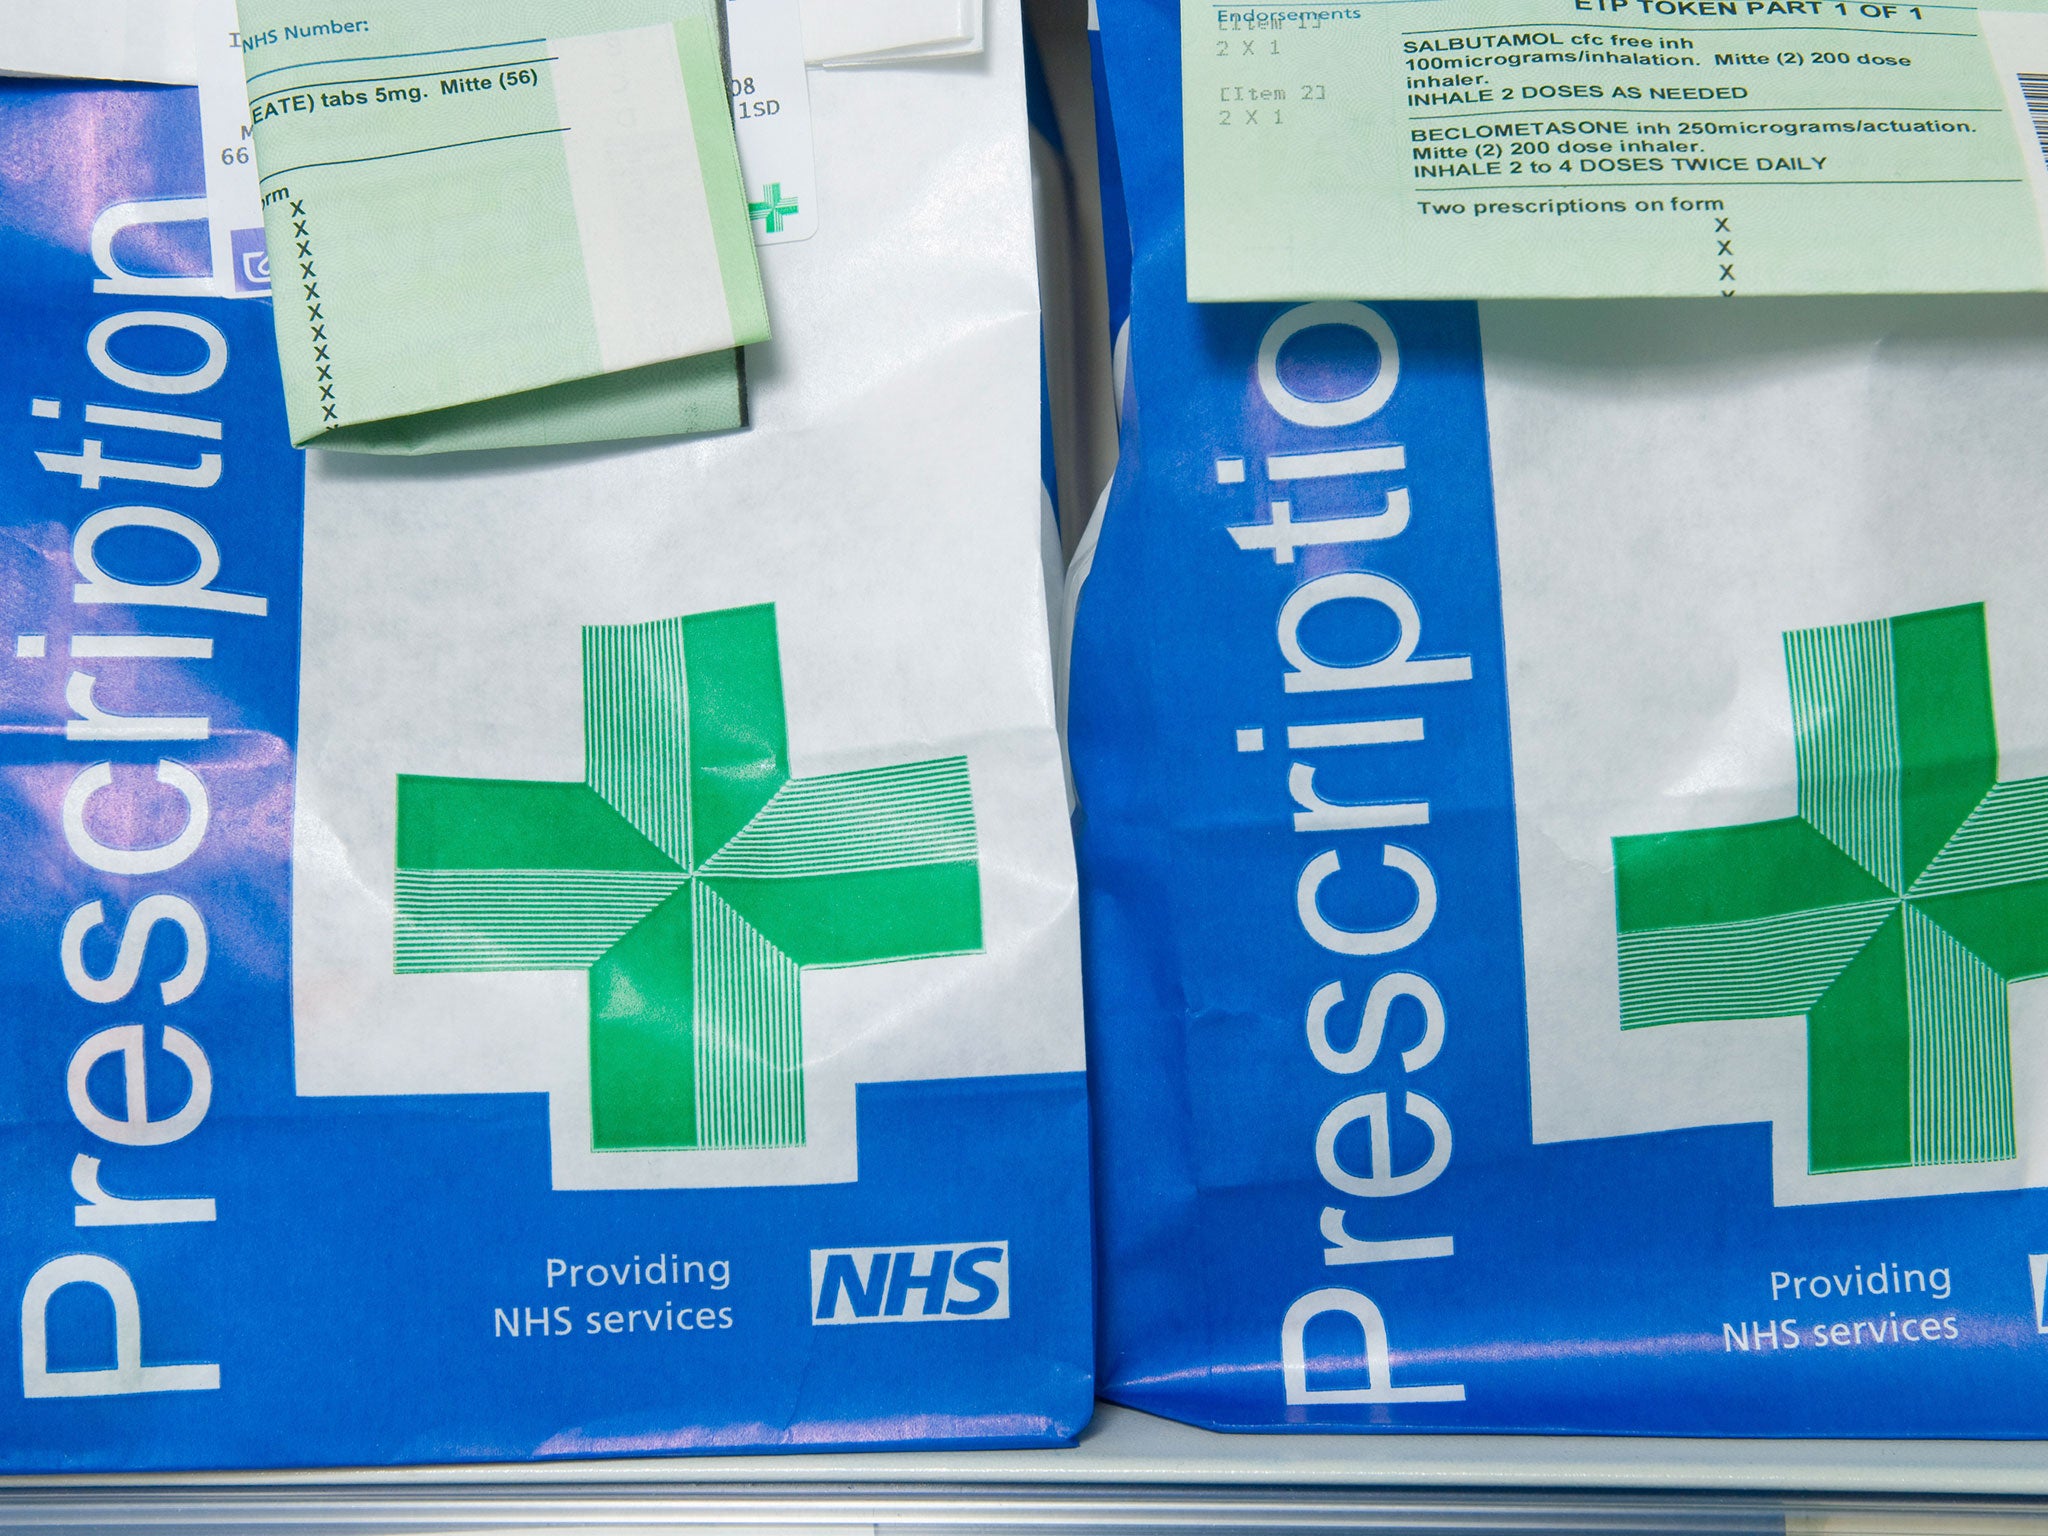 An NHS prescription will cost £8.60 in England from 1 April